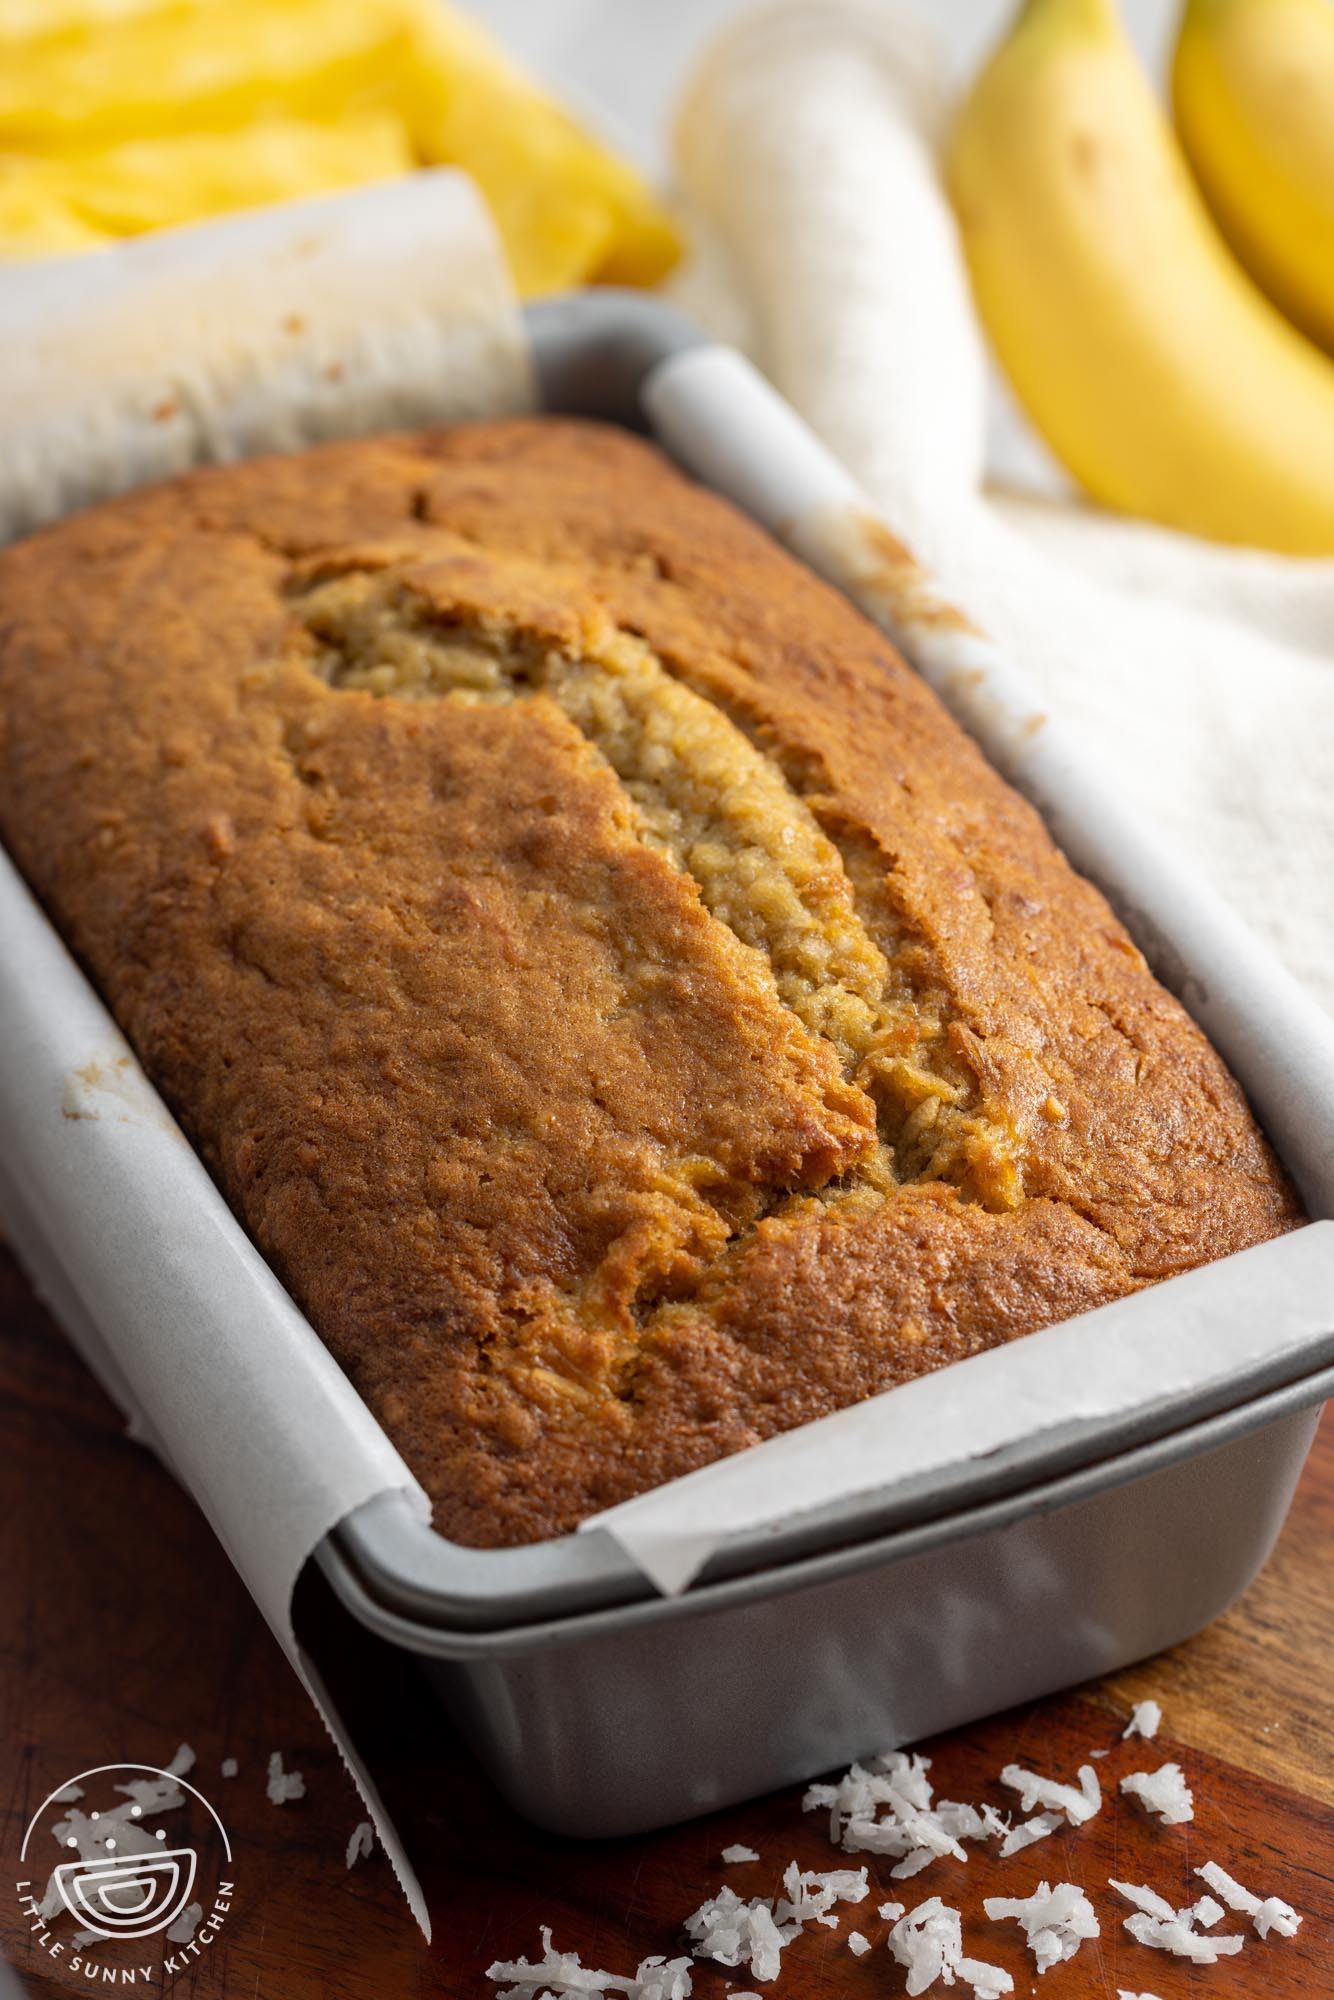 Baked banana bread in a loaf pan lined with parchment paper.